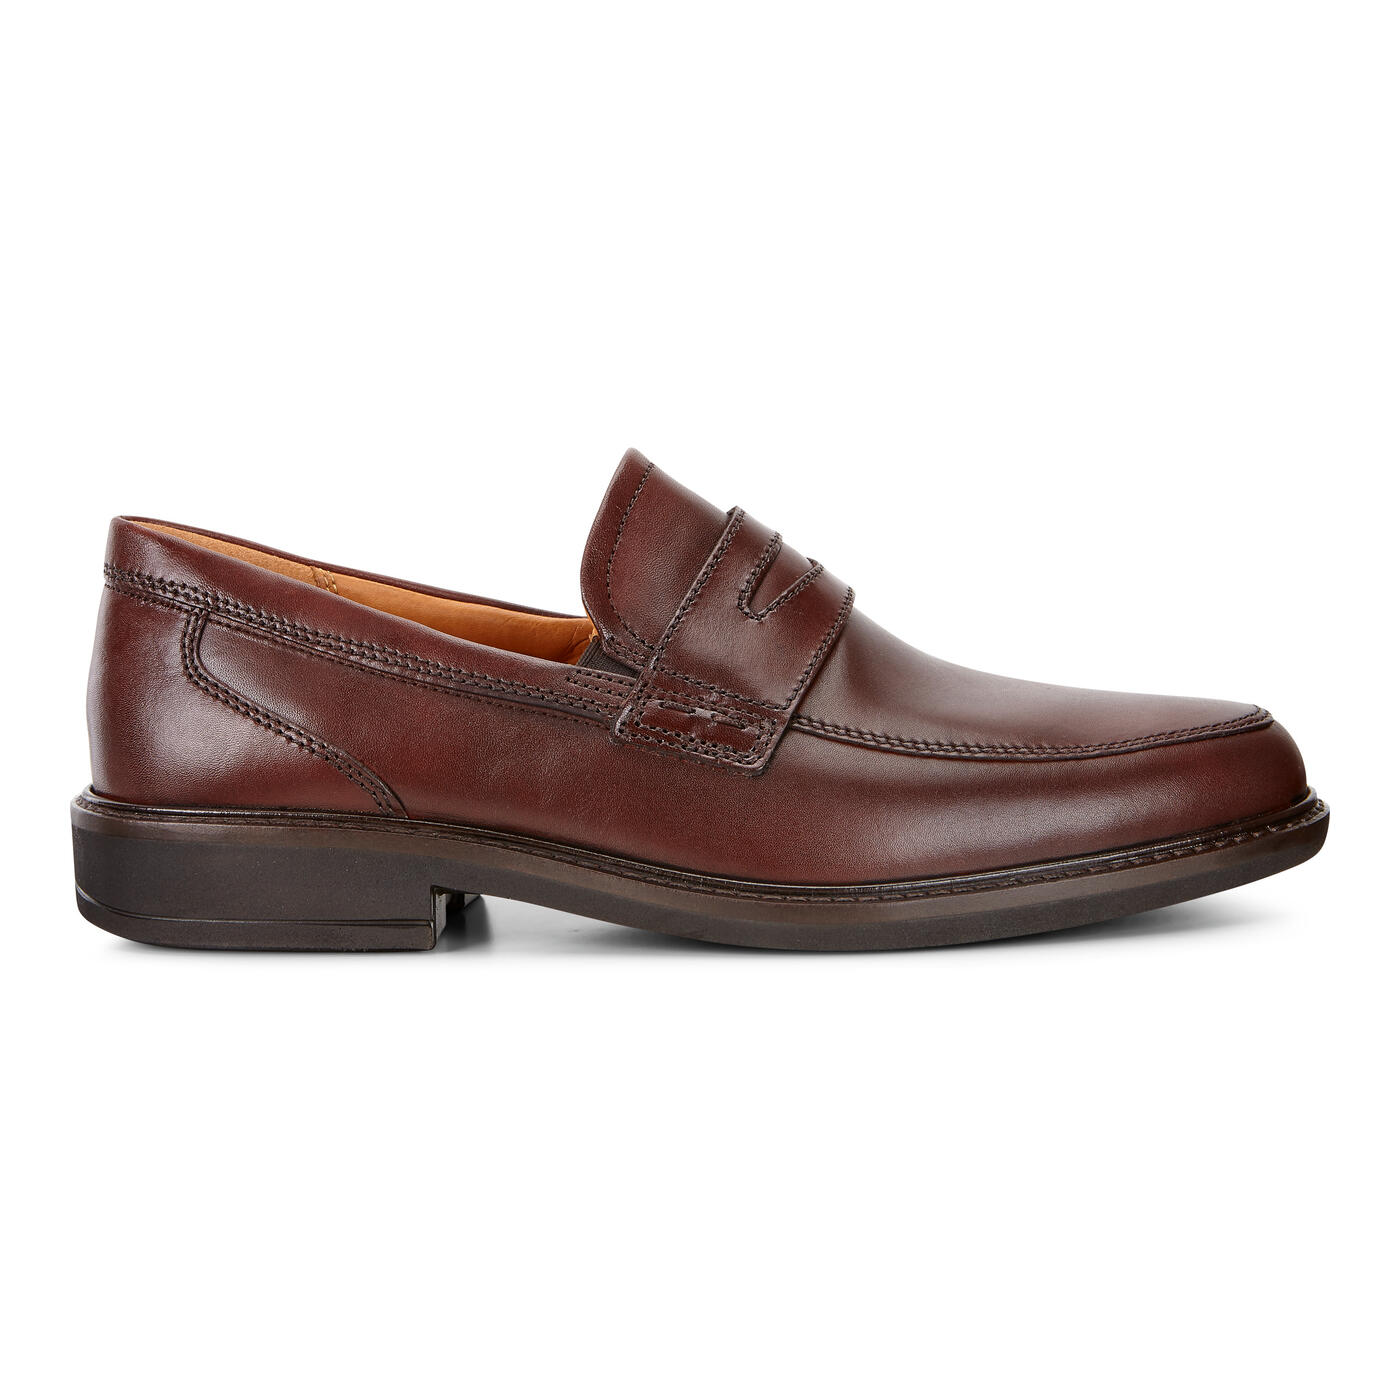 ECCO Holton Penny Loafer | Men's Formal Shoes | ECCO® Shoes